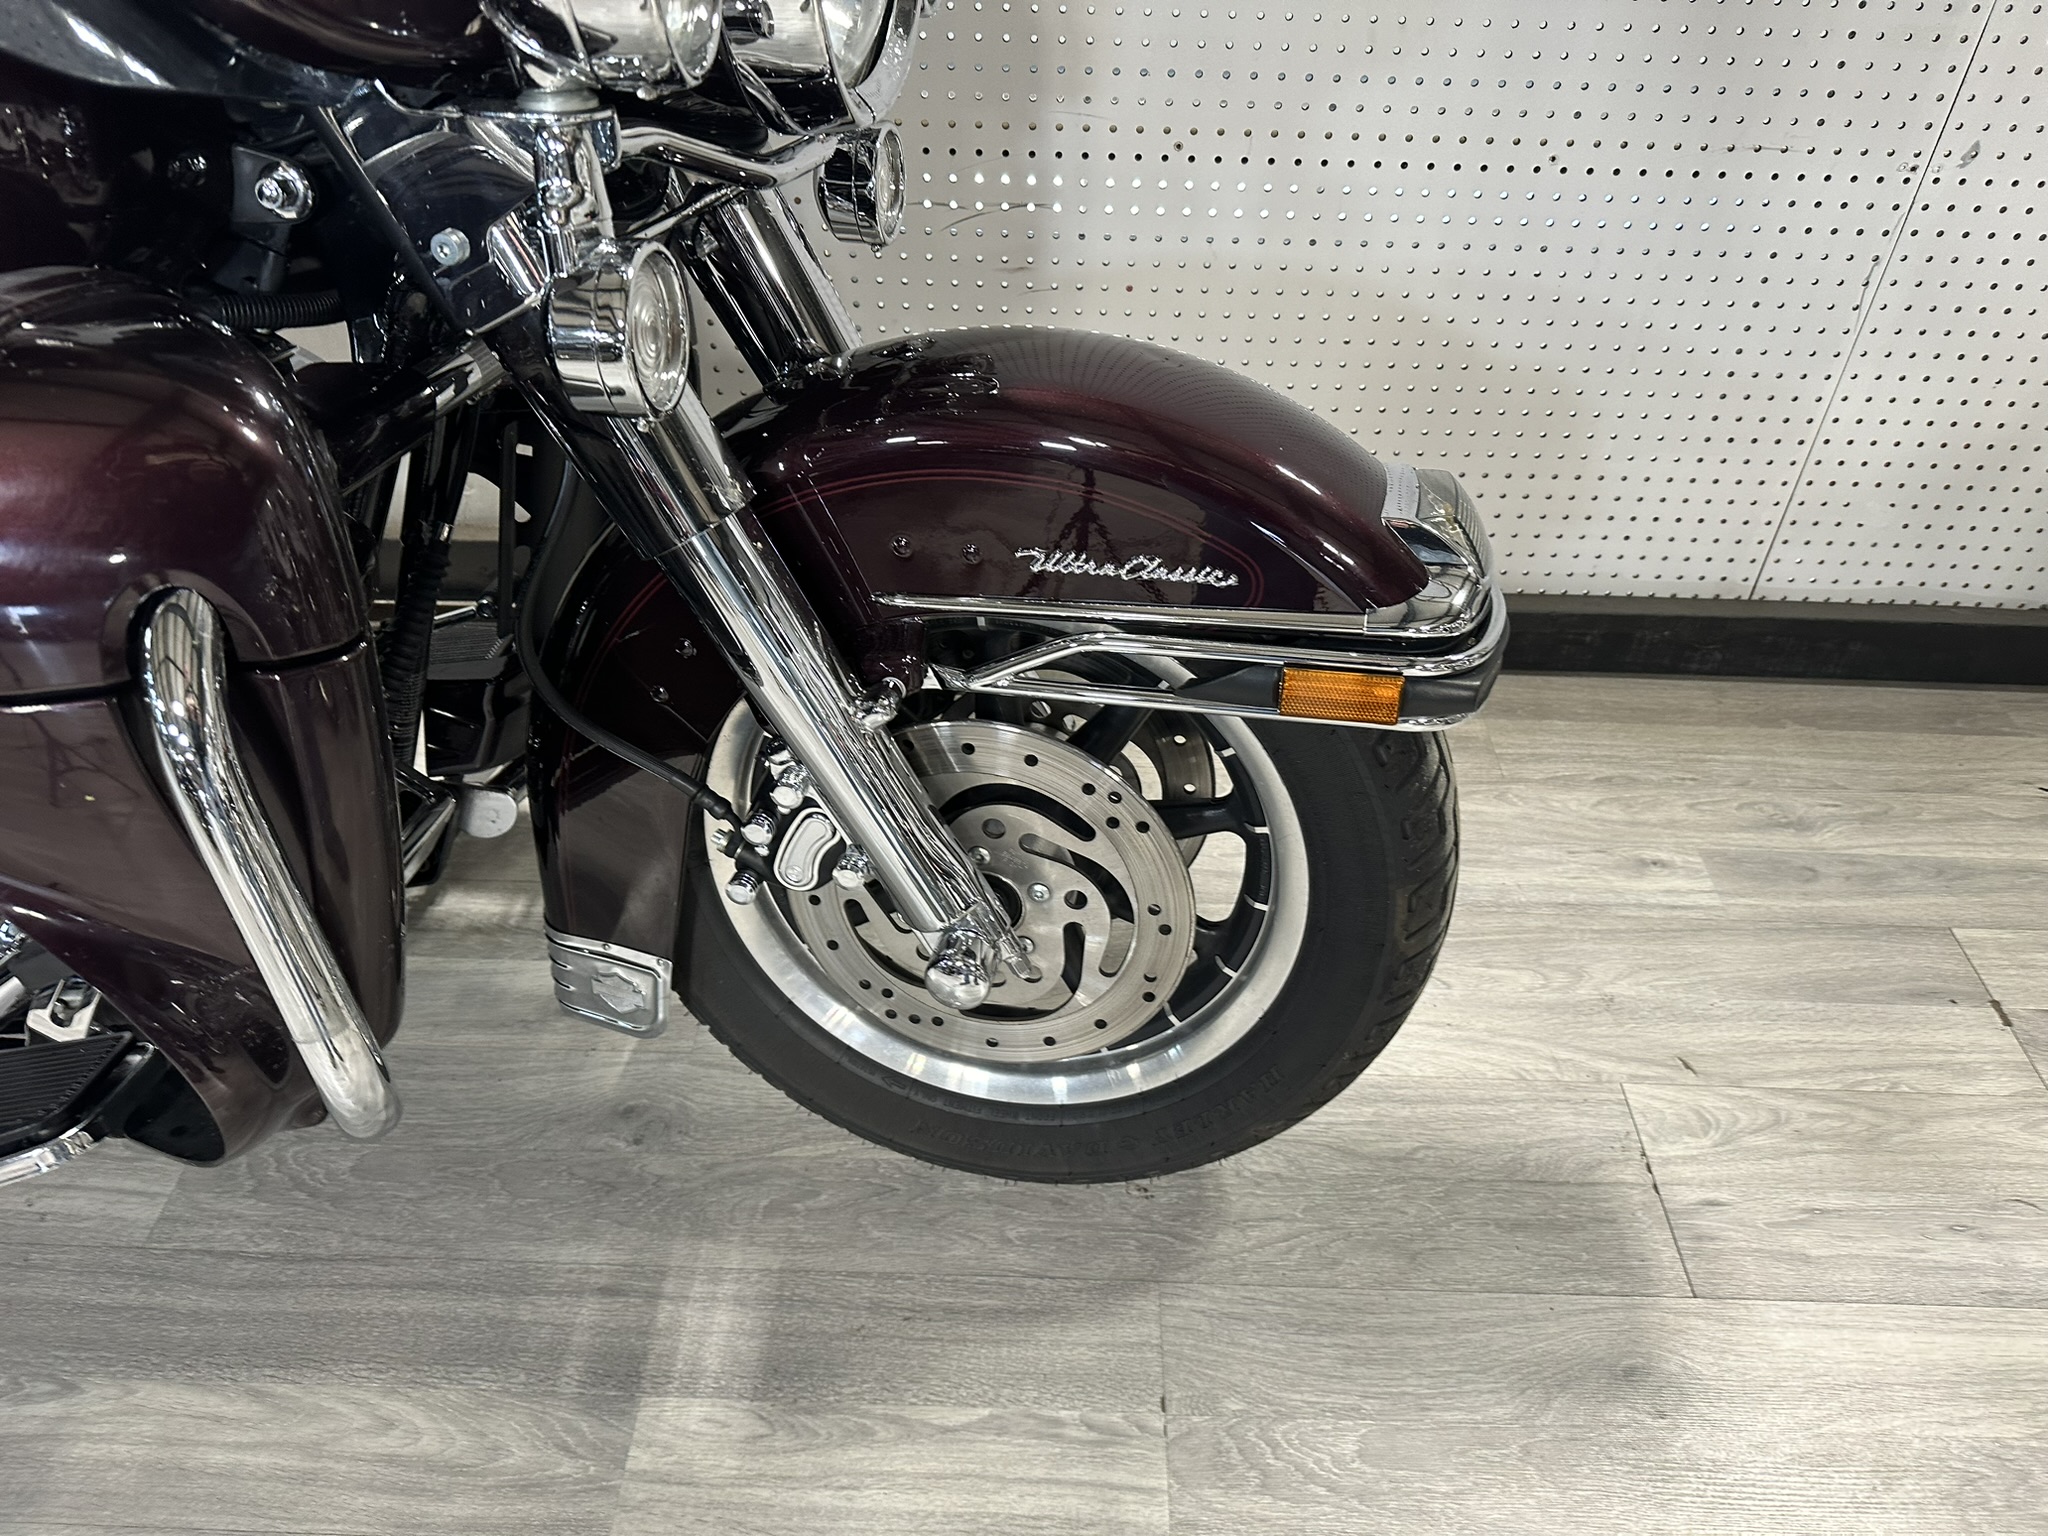 HARLEY DAVIDSON ULTRA CLASSIC FOR SALE ONTARIO